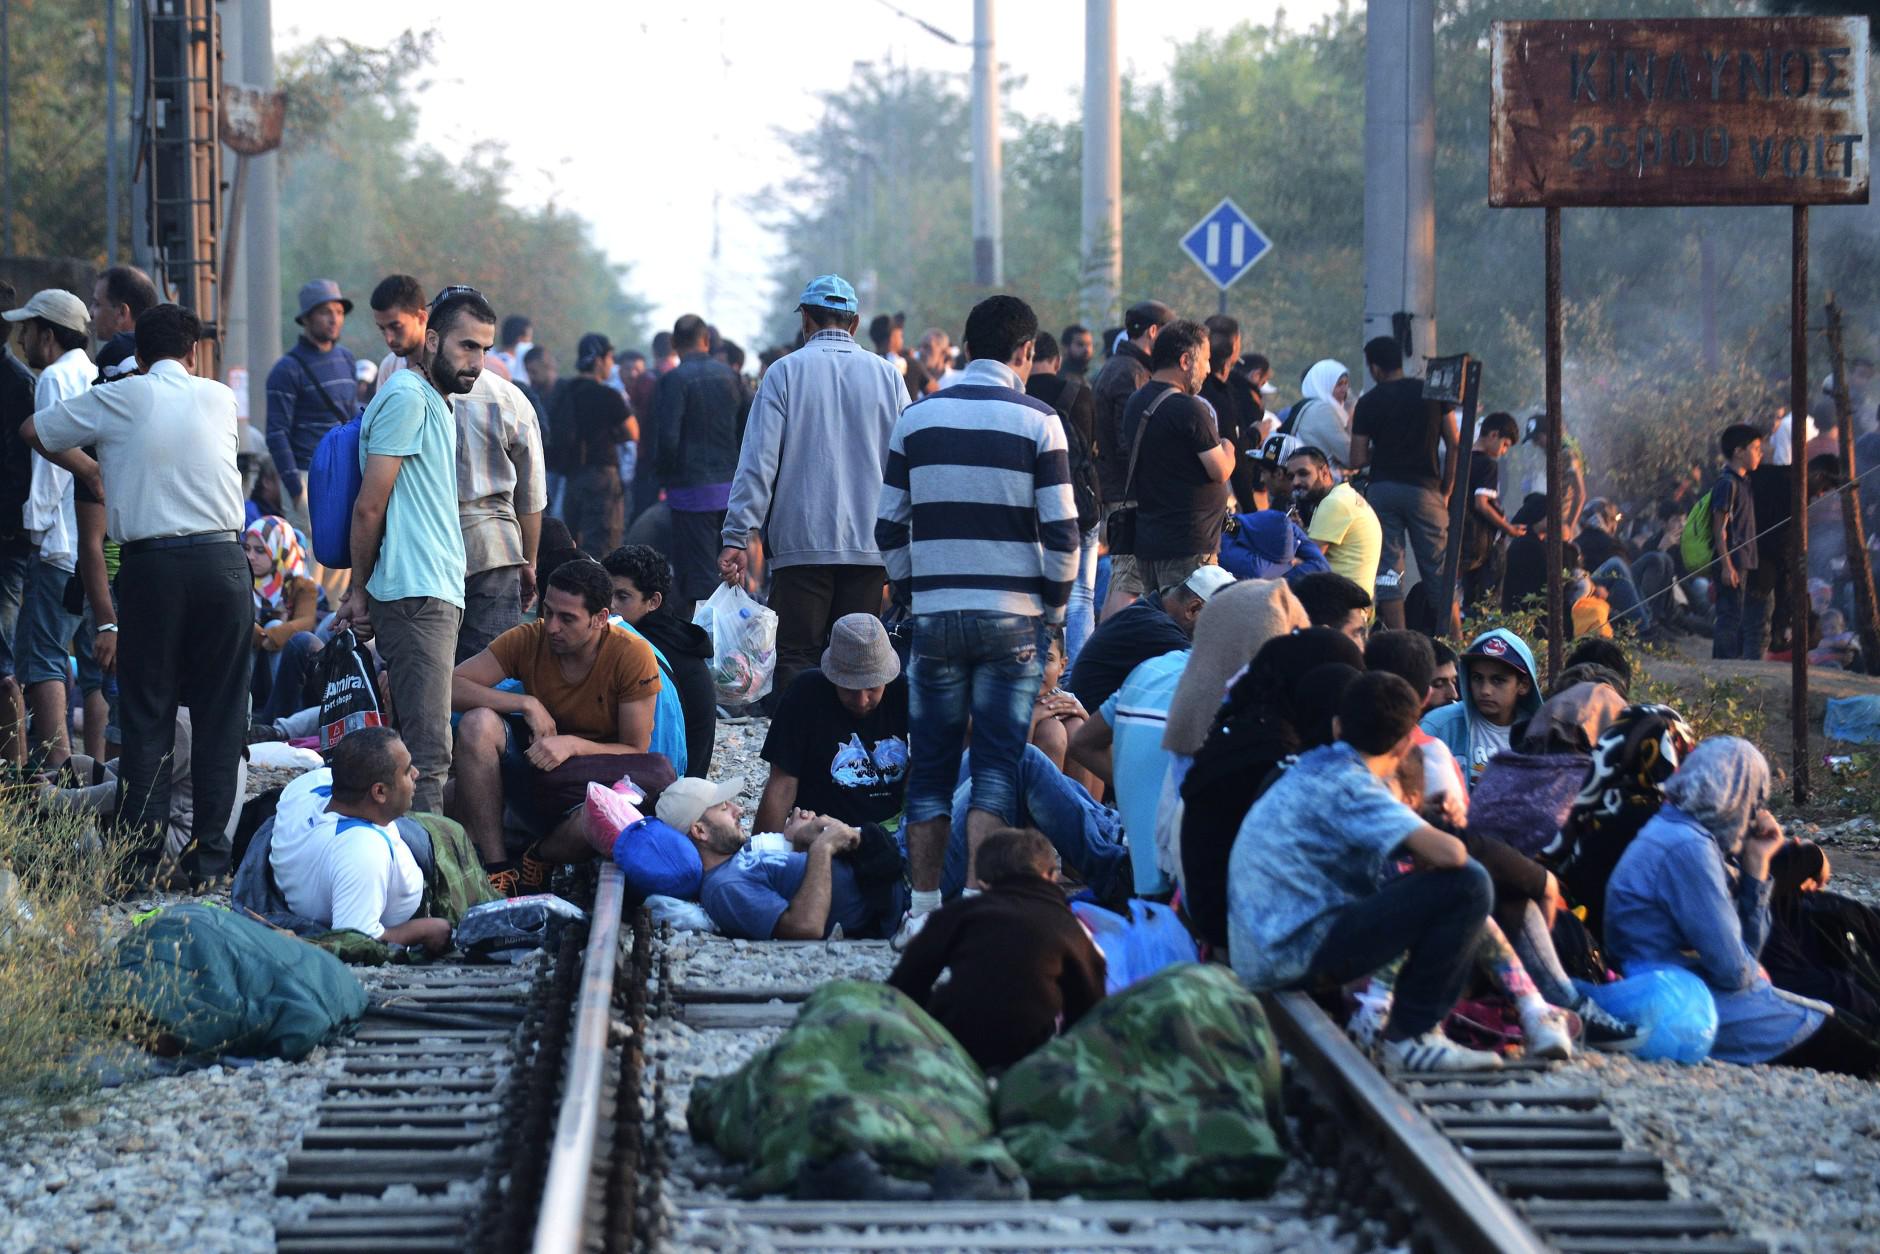 FOR WEDNESDAY AUG. 19, 2015 STORY MIGRANTS LOST IN TRANSIT BY KOSTAS KADOURIS - In this picture made on Wednesday, Aug. 12, 2015, Syrian refugee wait at a railroad track of Idomeni, northern Greece. Bureaucratic mistakes and oversights by Greek officials overwhelmed by an unprecedented refugee influx are making life harder for thousands transiting through Greece as they flee war in Syria, but are caught with Greek transit papers that are faulty because of careless mistakes by overwhelmed officials. (AP Photo/Giannis Papanikos)